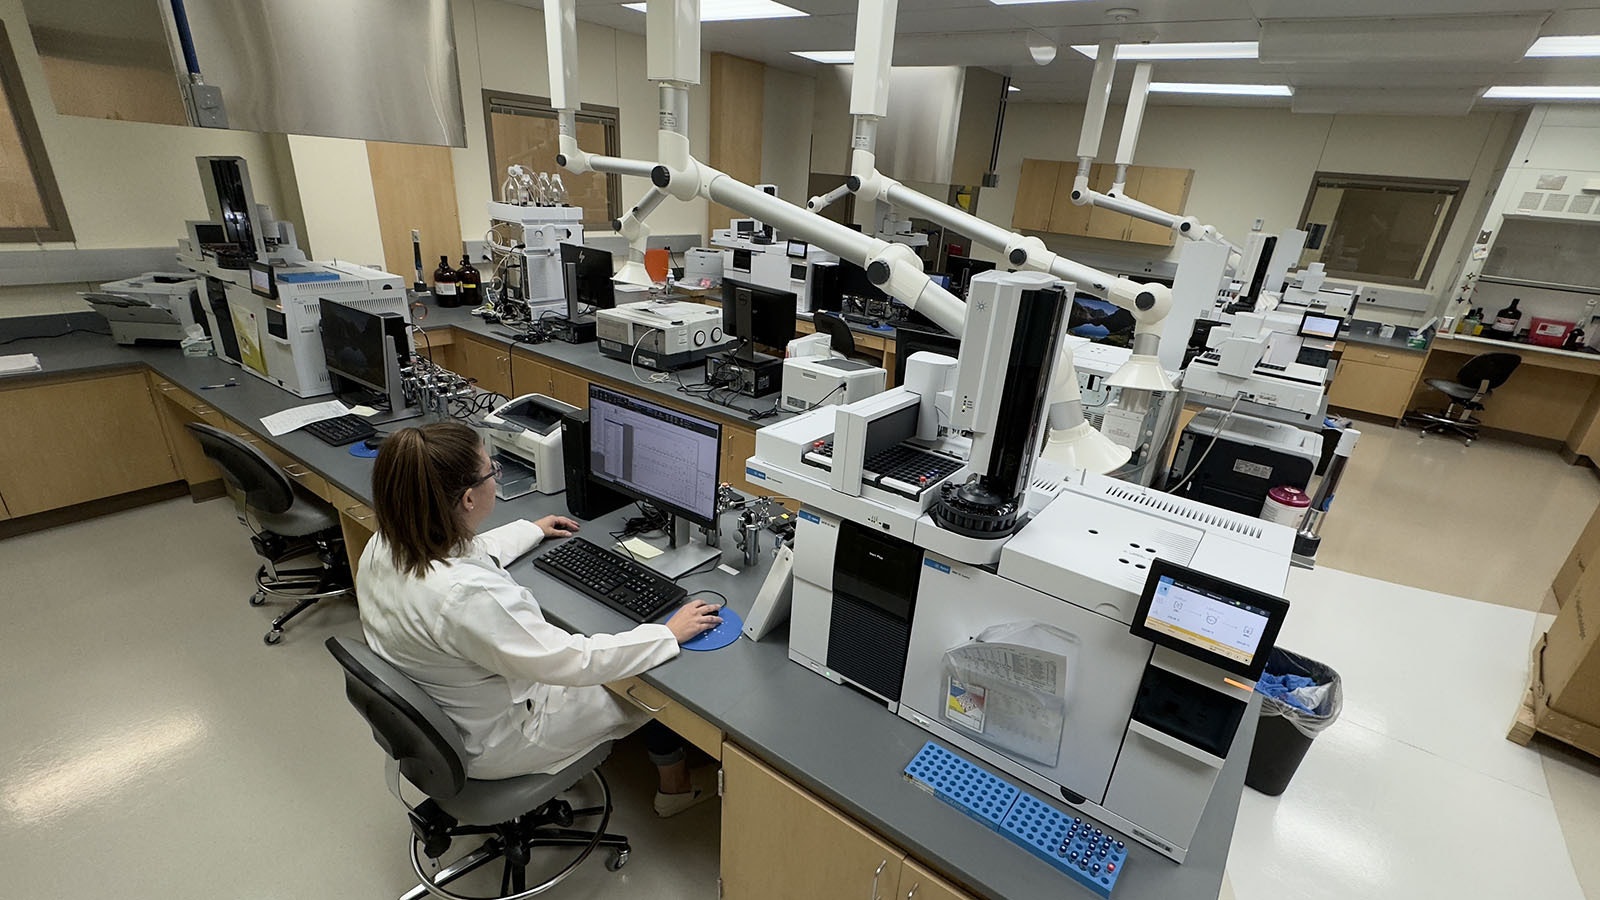 Lindsey Human is a forensic drug chemist at the Wyoming State Crime Lab in Cheyenne. There's close to $1 million worth of equipment in this lab, including six machines that separate and identify various chemicals.